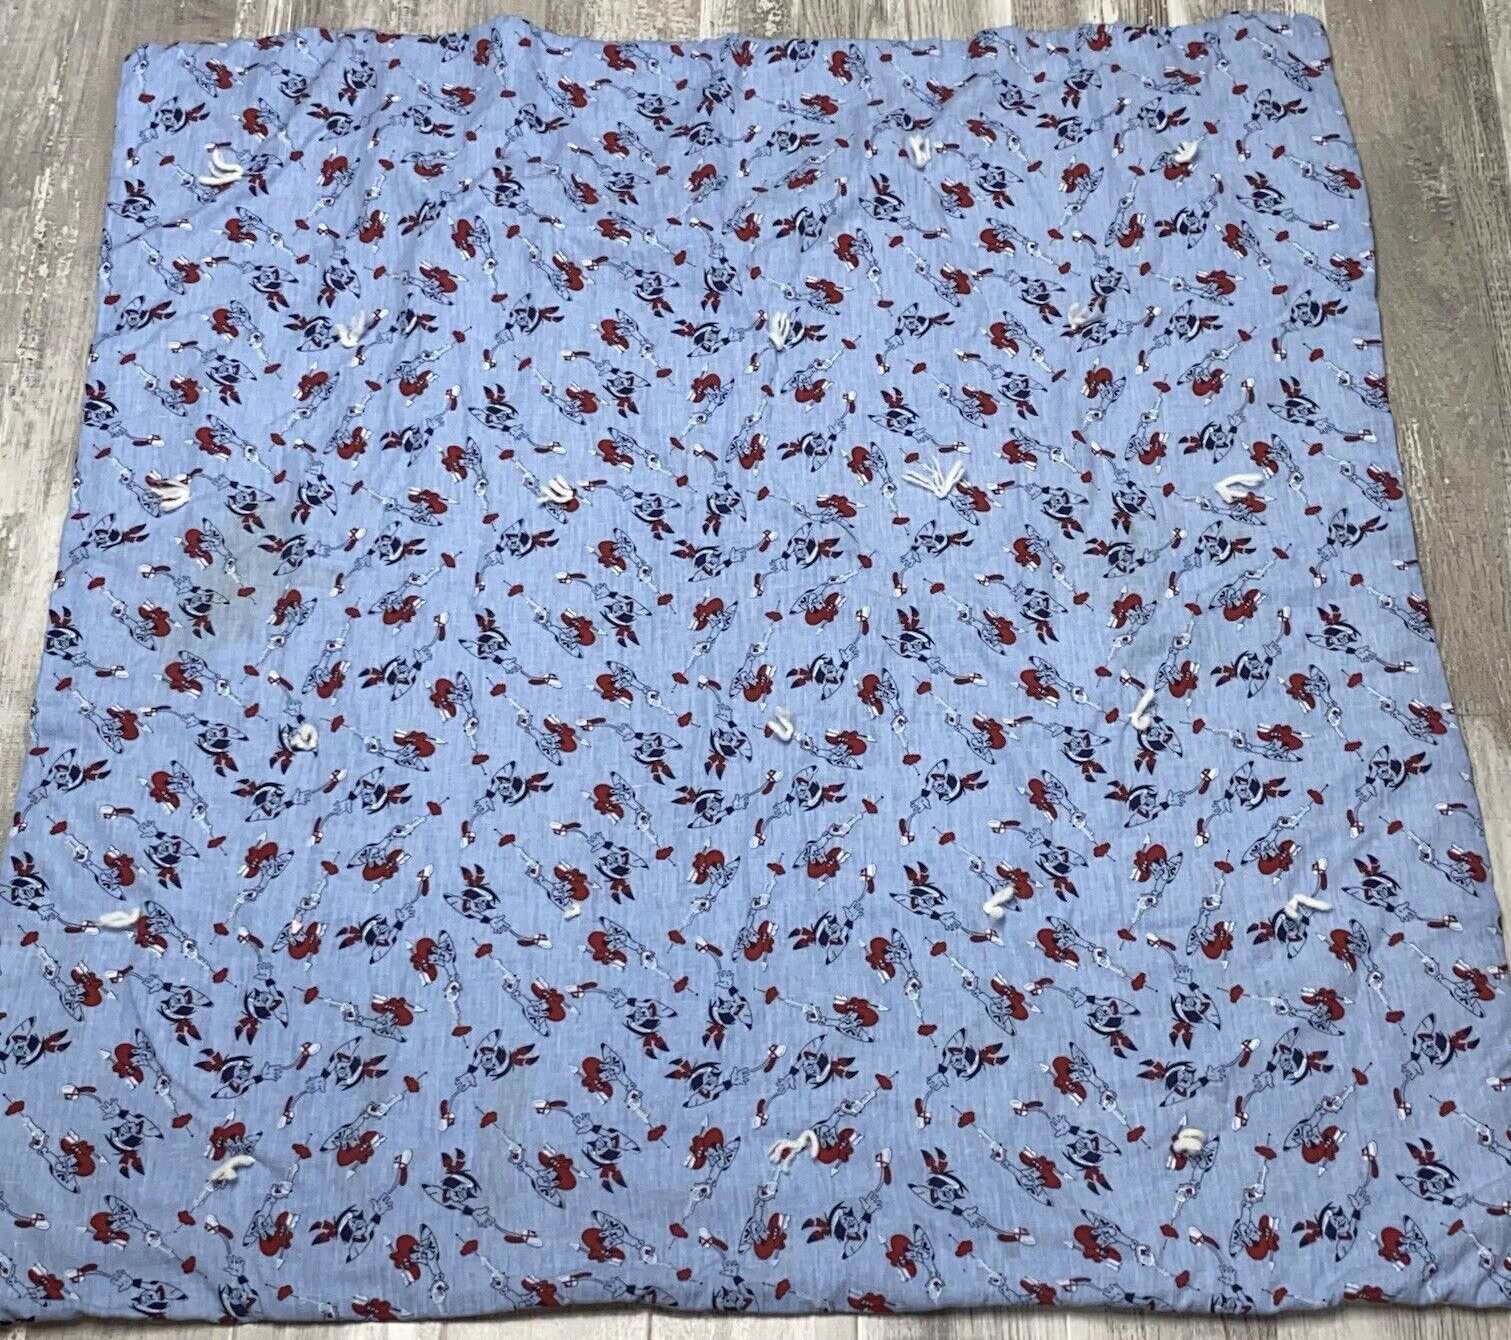 Rare Vtg 50's 60's Cowboys & Indians Western Baby Blanket Throw 42x40